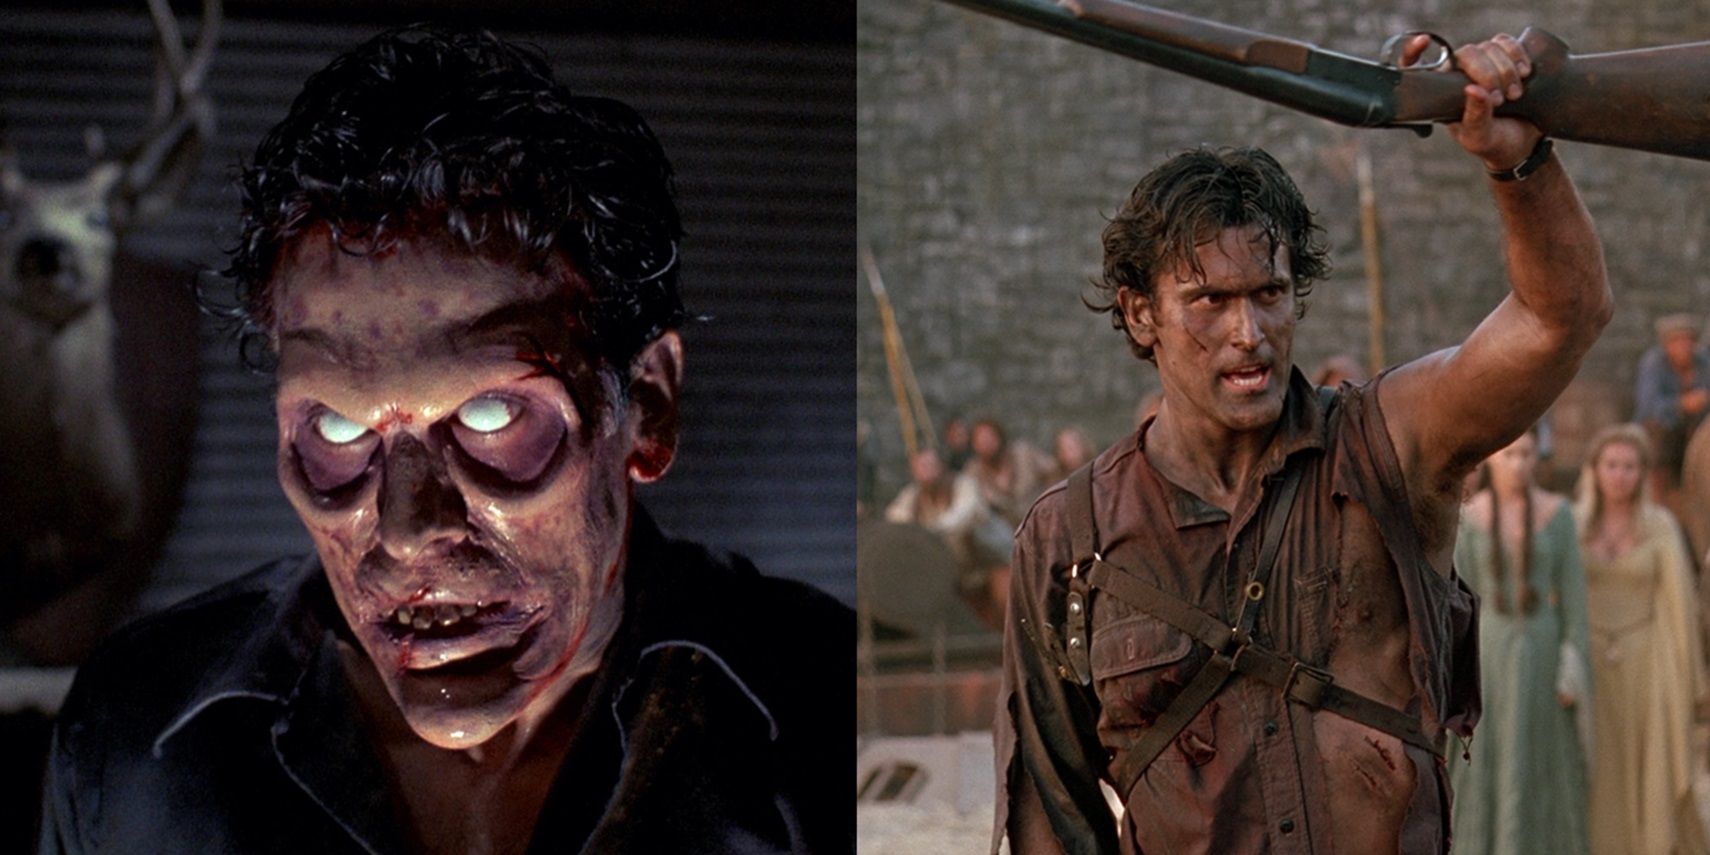 The 10 Best Effects in 'The Evil Dead' Franchise [Halloweenies Podcast]